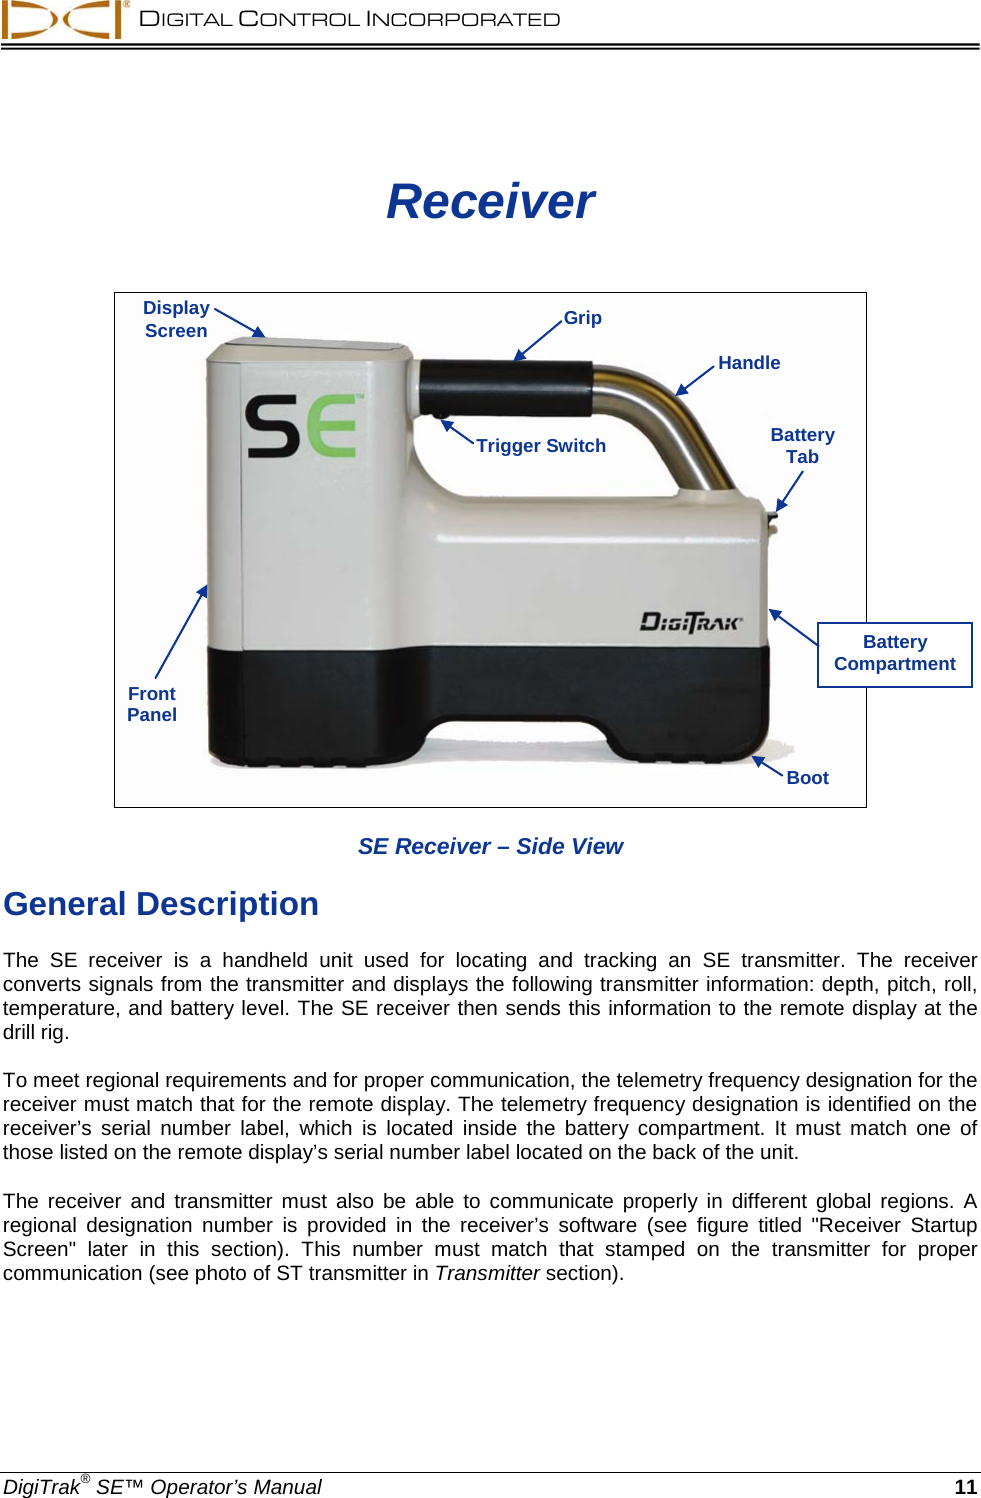  DIGITAL CONTROL INCORPORATED  DigiTrak® SE™ Operator’s Manual 11 Receiver       SE Receiver – Side View General Description The  SE receiver is a handheld unit used  for locating and tracking  an  SE transmitter.  The receiver converts signals from the transmitter and displays the following transmitter information: depth, pitch, roll, temperature, and battery level. The SE receiver then sends this information to the remote display at the drill rig. To meet regional requirements and for proper communication, the telemetry frequency designation for the receiver must match that for the remote display. The telemetry frequency designation is identified on the receiver’s  serial number label, which is located  inside the battery compartment. It must match one of those listed on the remote display’s serial number label located on the back of the unit. The receiver and transmitter must also be able to communicate properly in different global regions. A regional  designation number is provided in the receiver’s software (see figure titled &quot;Receiver Startup Screen&quot;  later in this section). This number must match that stamped on the transmitter for proper communication (see photo of ST transmitter in Transmitter section). Trigger Switch Front Panel Boot Battery Tab Display Screen Handle Grip Battery Compartment 